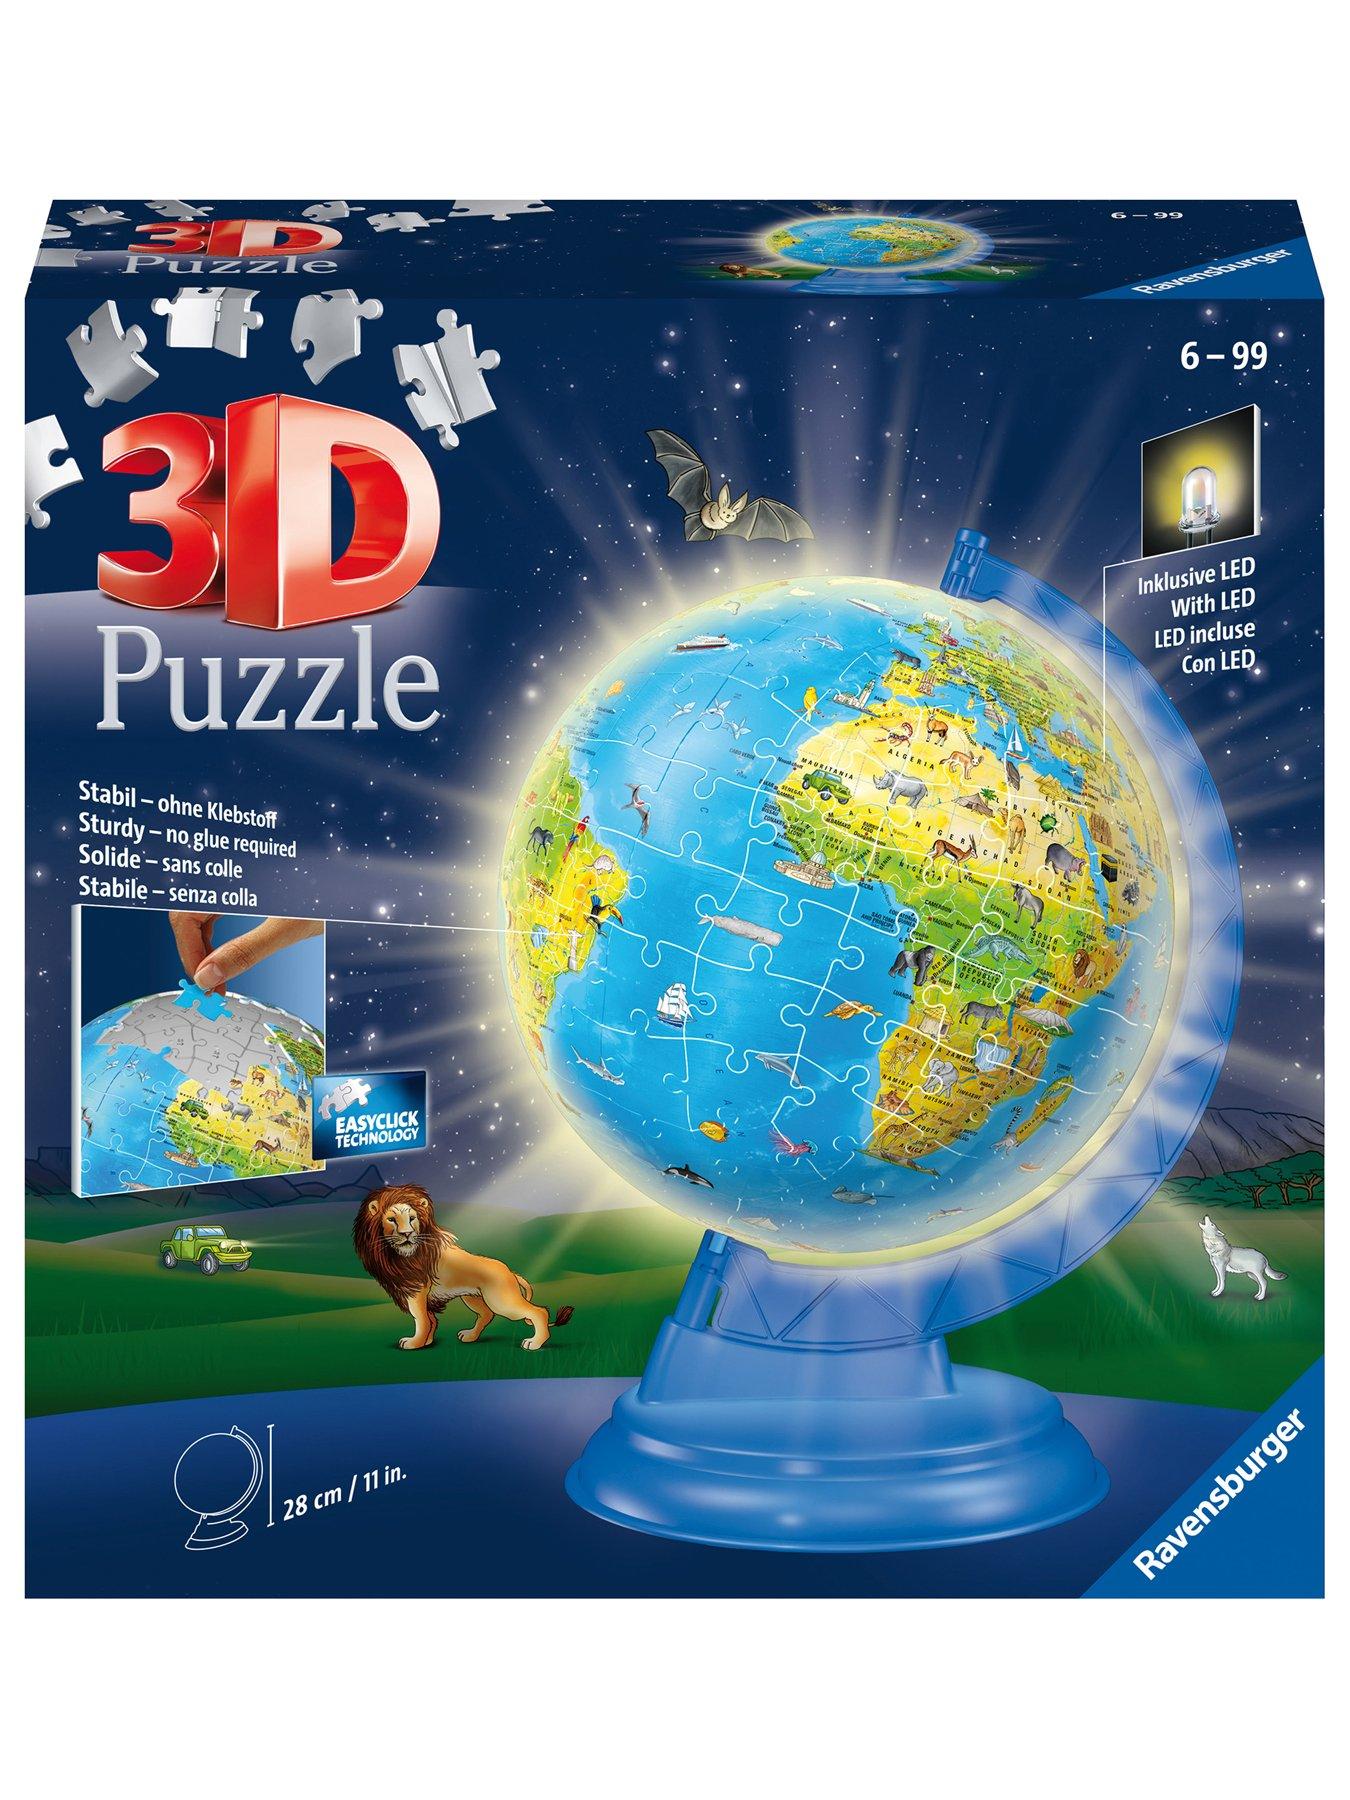  Ravensburger Pokemon 3D Jigsaw Puzzle Ball for Kids Age 6 Years  Up - 72 Pieces : Ravensburger: Toys & Games